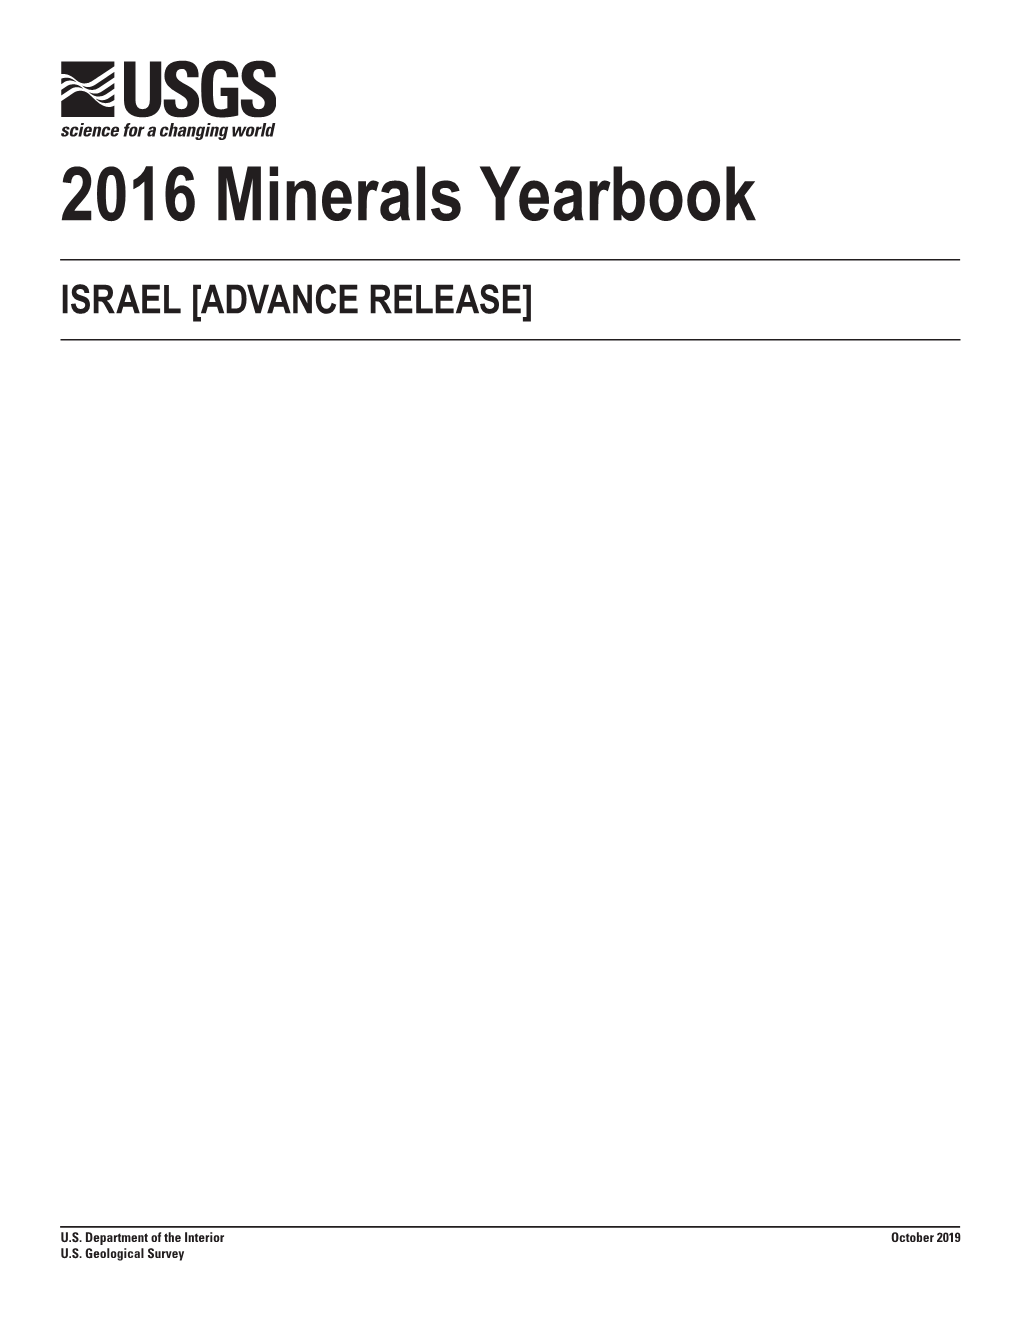 The Mineral Industry of Israel in 2016